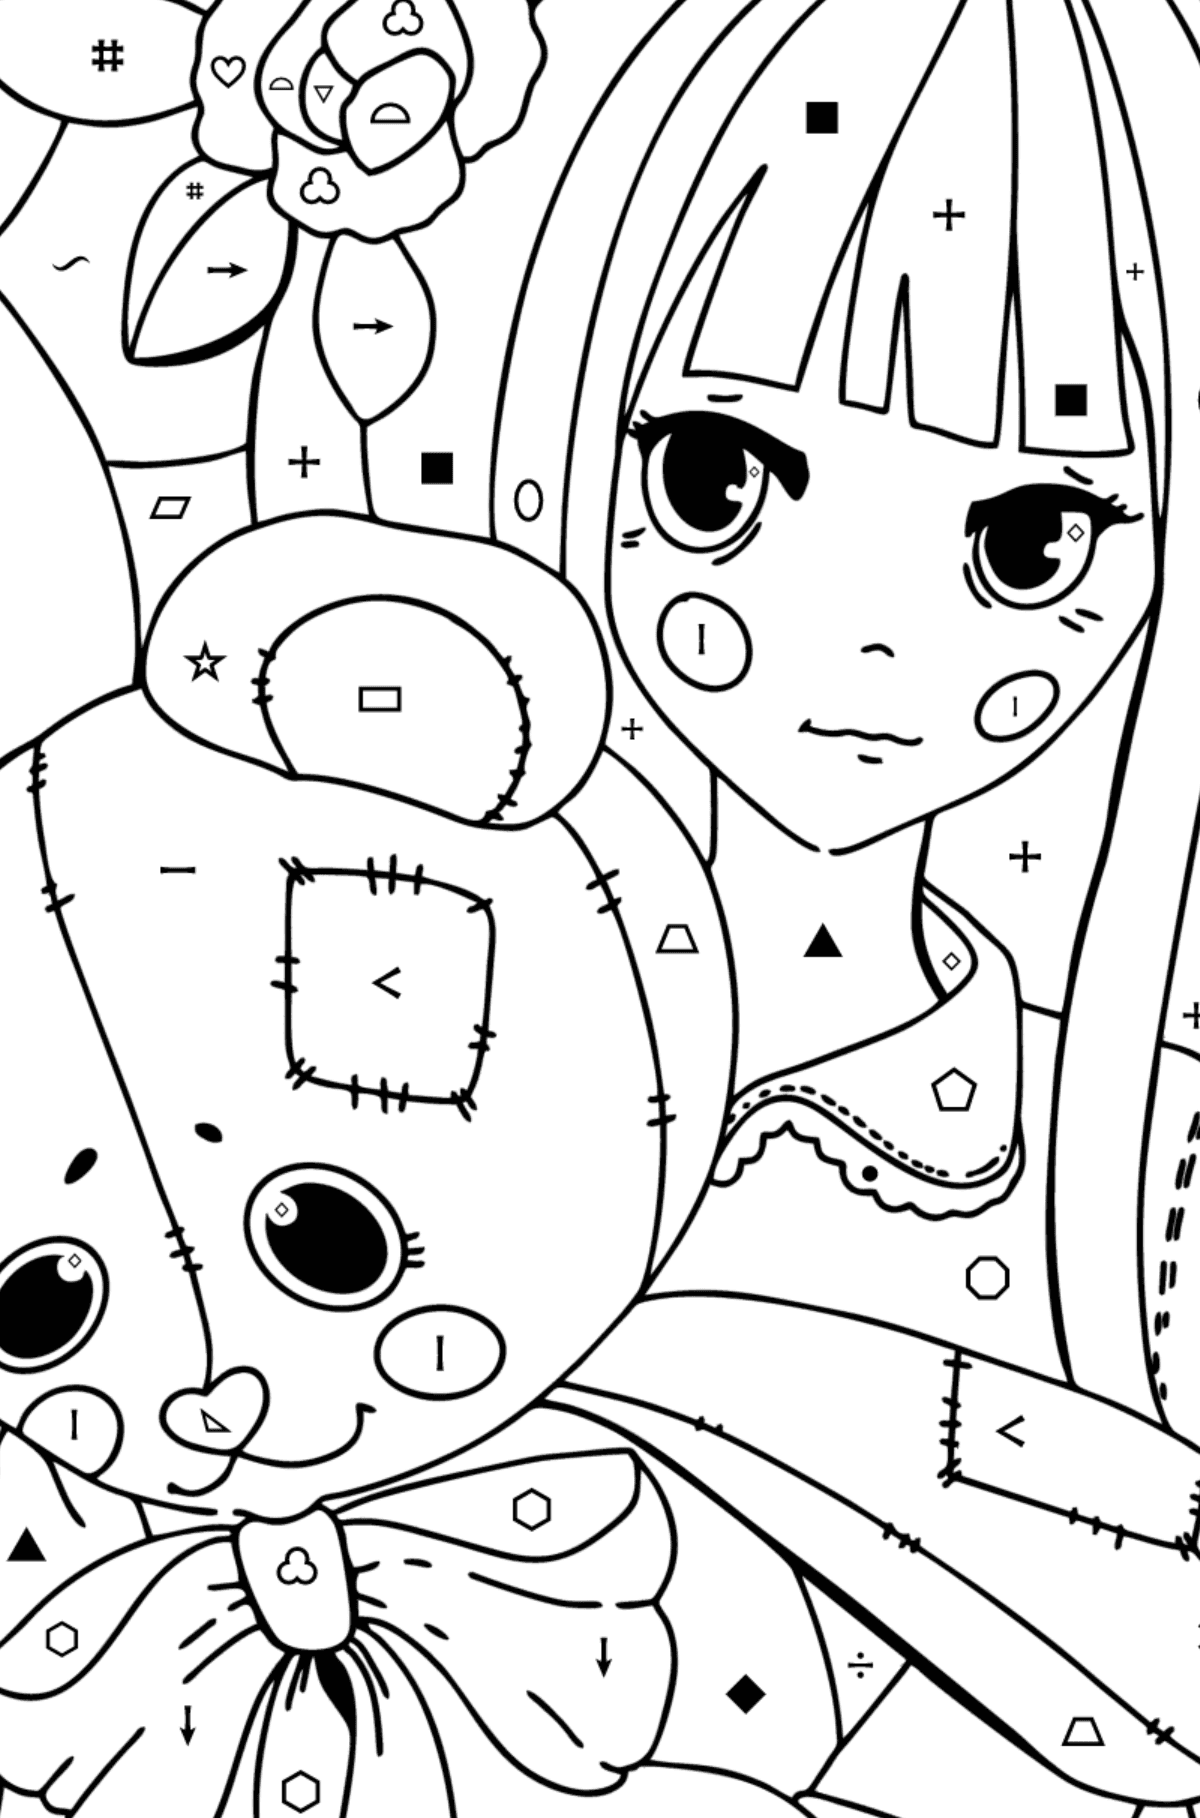 Anime girl coloring page holding a teddy - Coloring by Symbols and Geometric Shapes for Kids